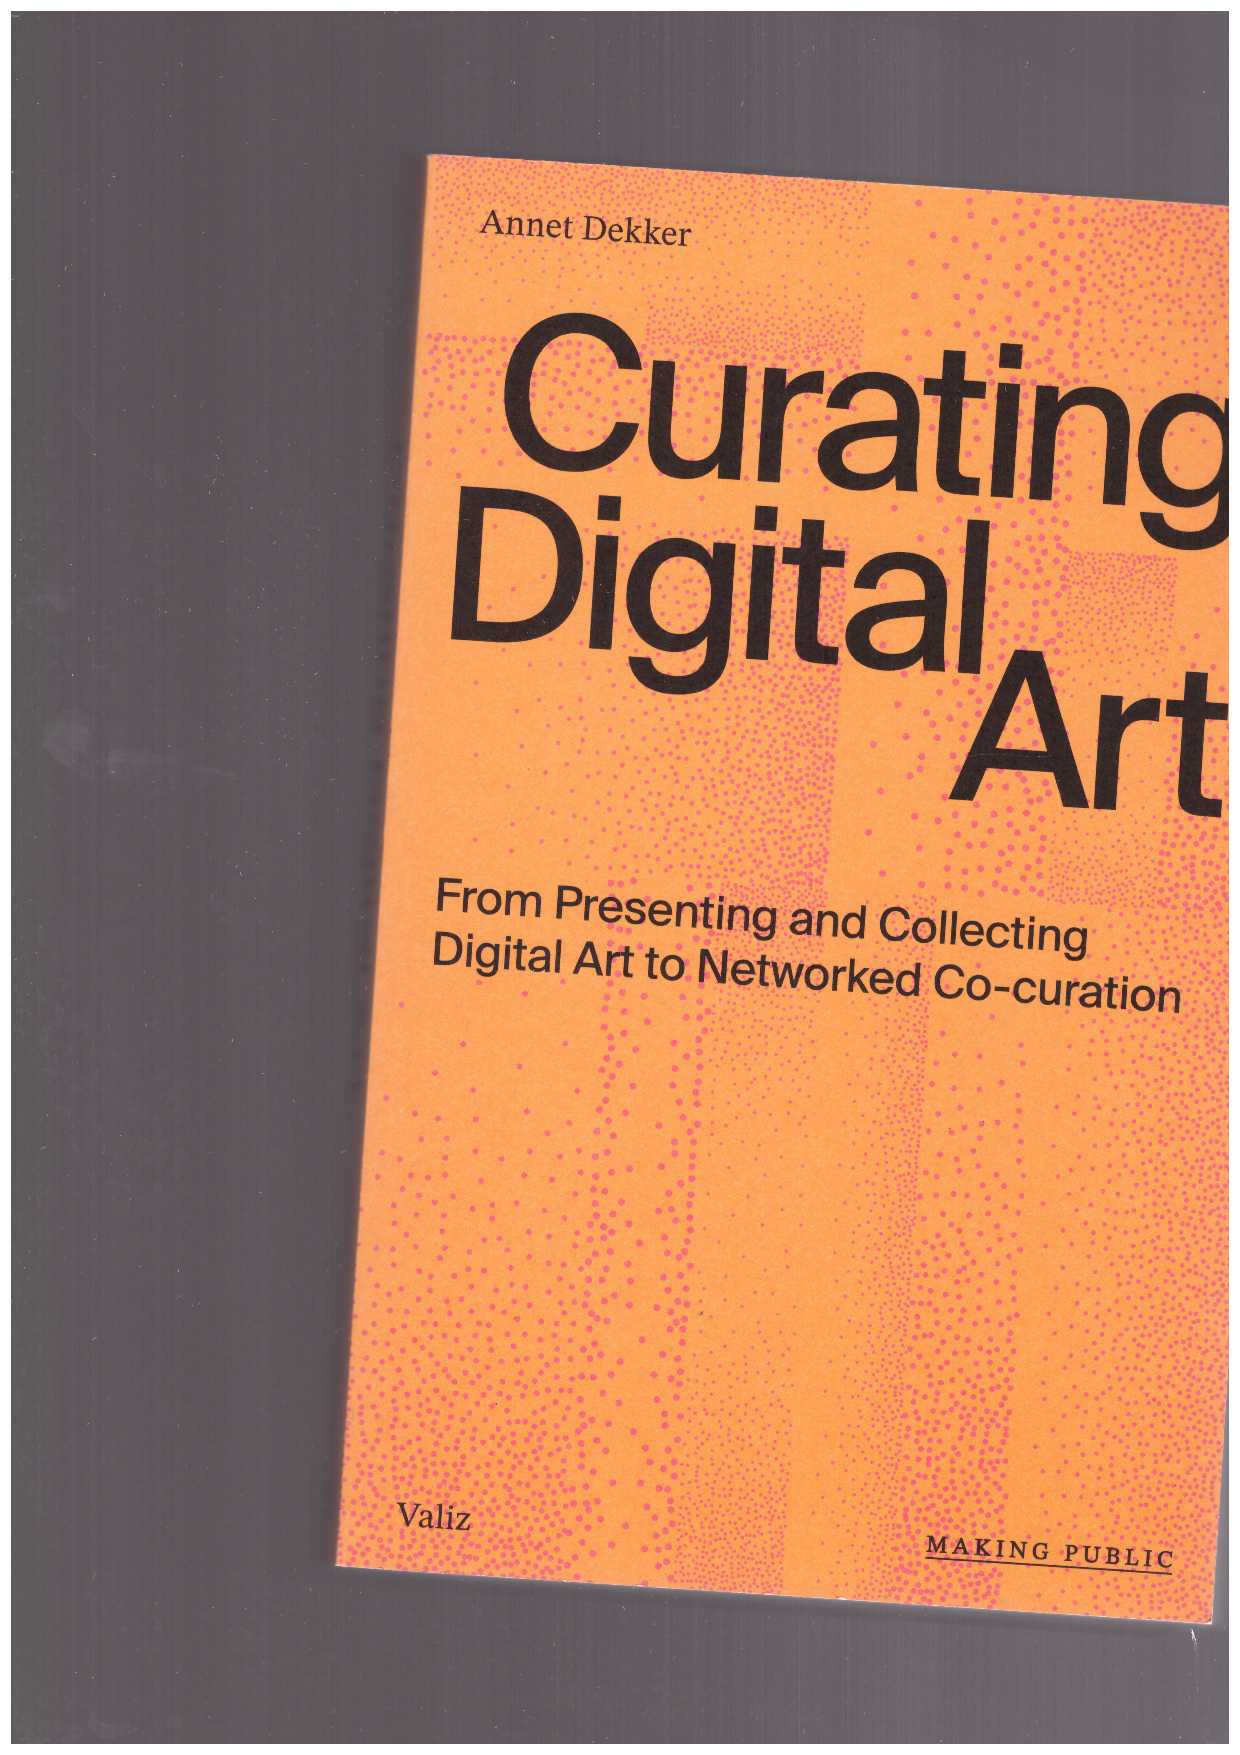 DEKKER, Annet (ed.) - Curating Digital Art. From Presenting and Collecting Digital Art to Networked Co-Curation